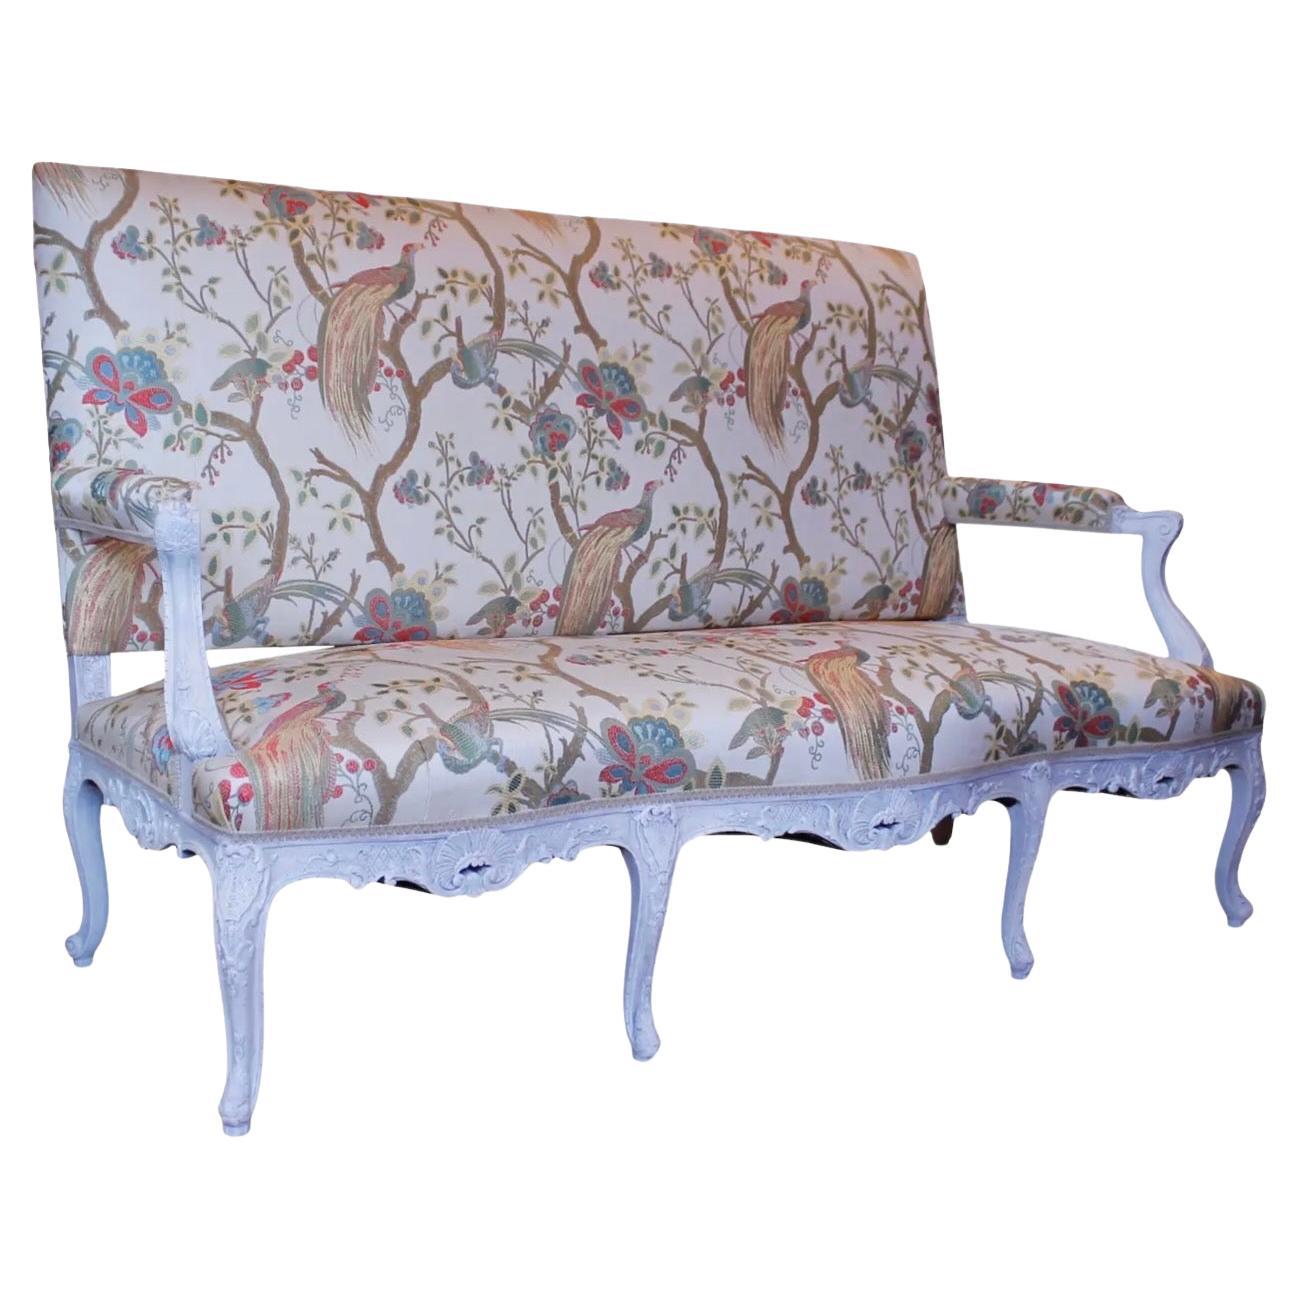 Antique Painted French Régence Style Sofa Or Settee